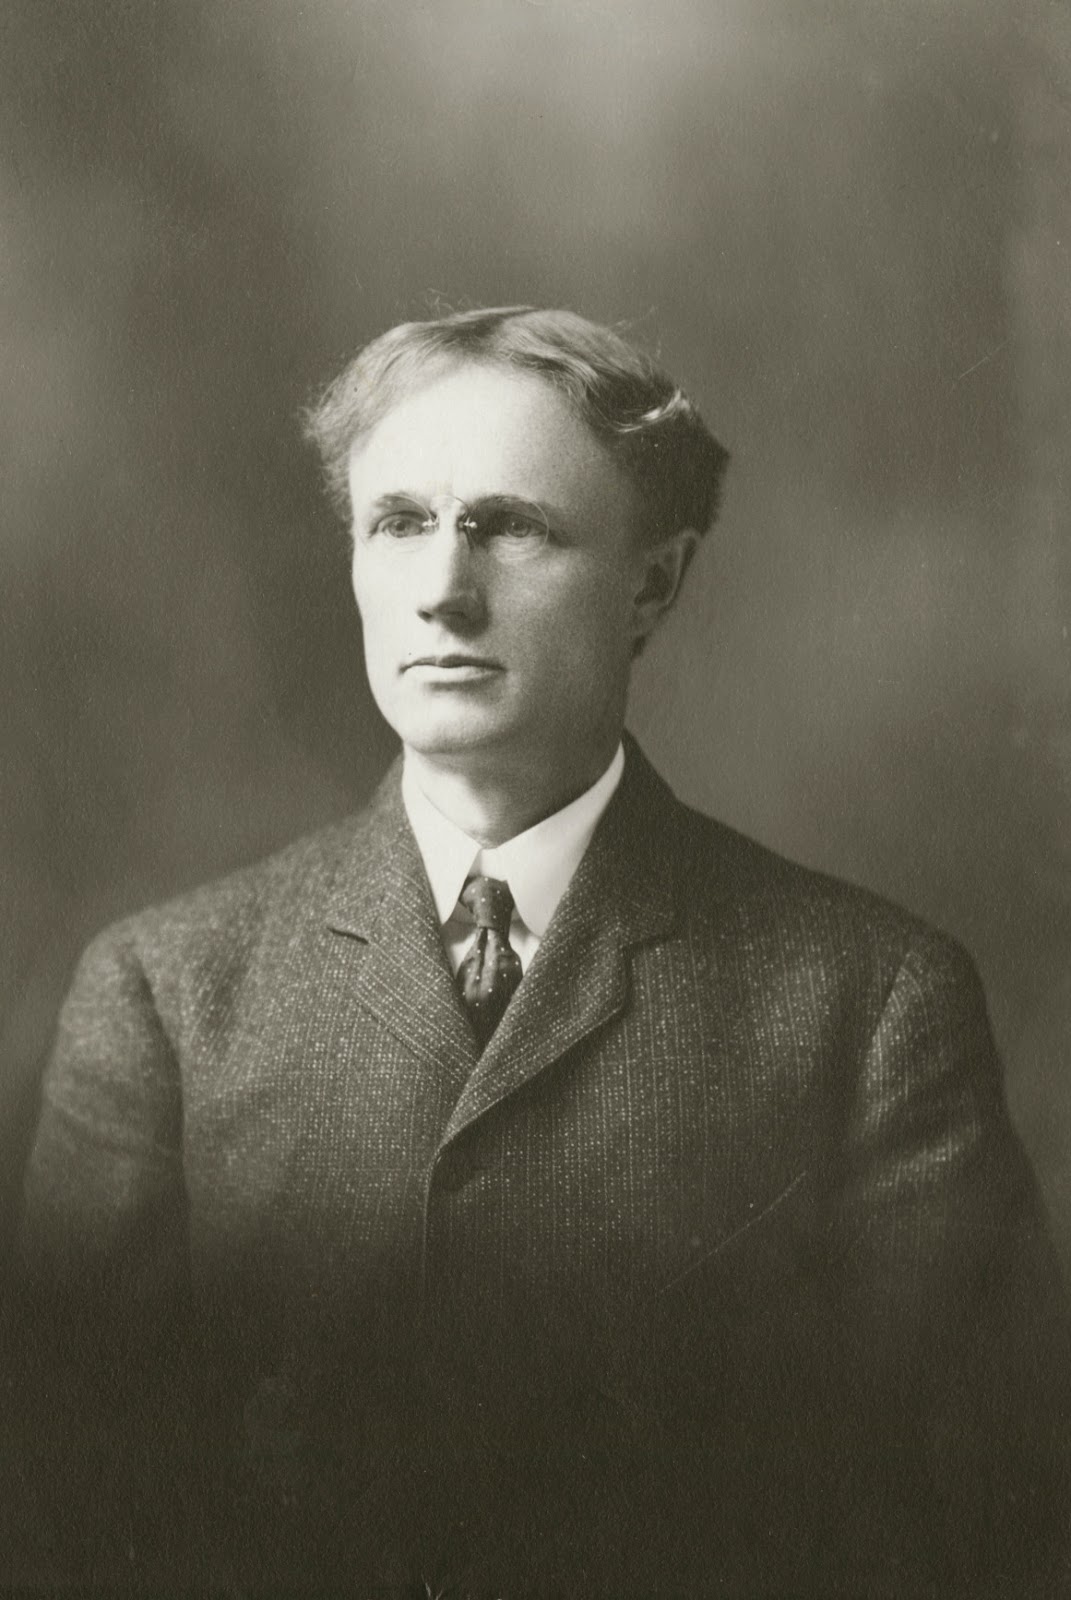 A black and white photograph of a white man with glasses.